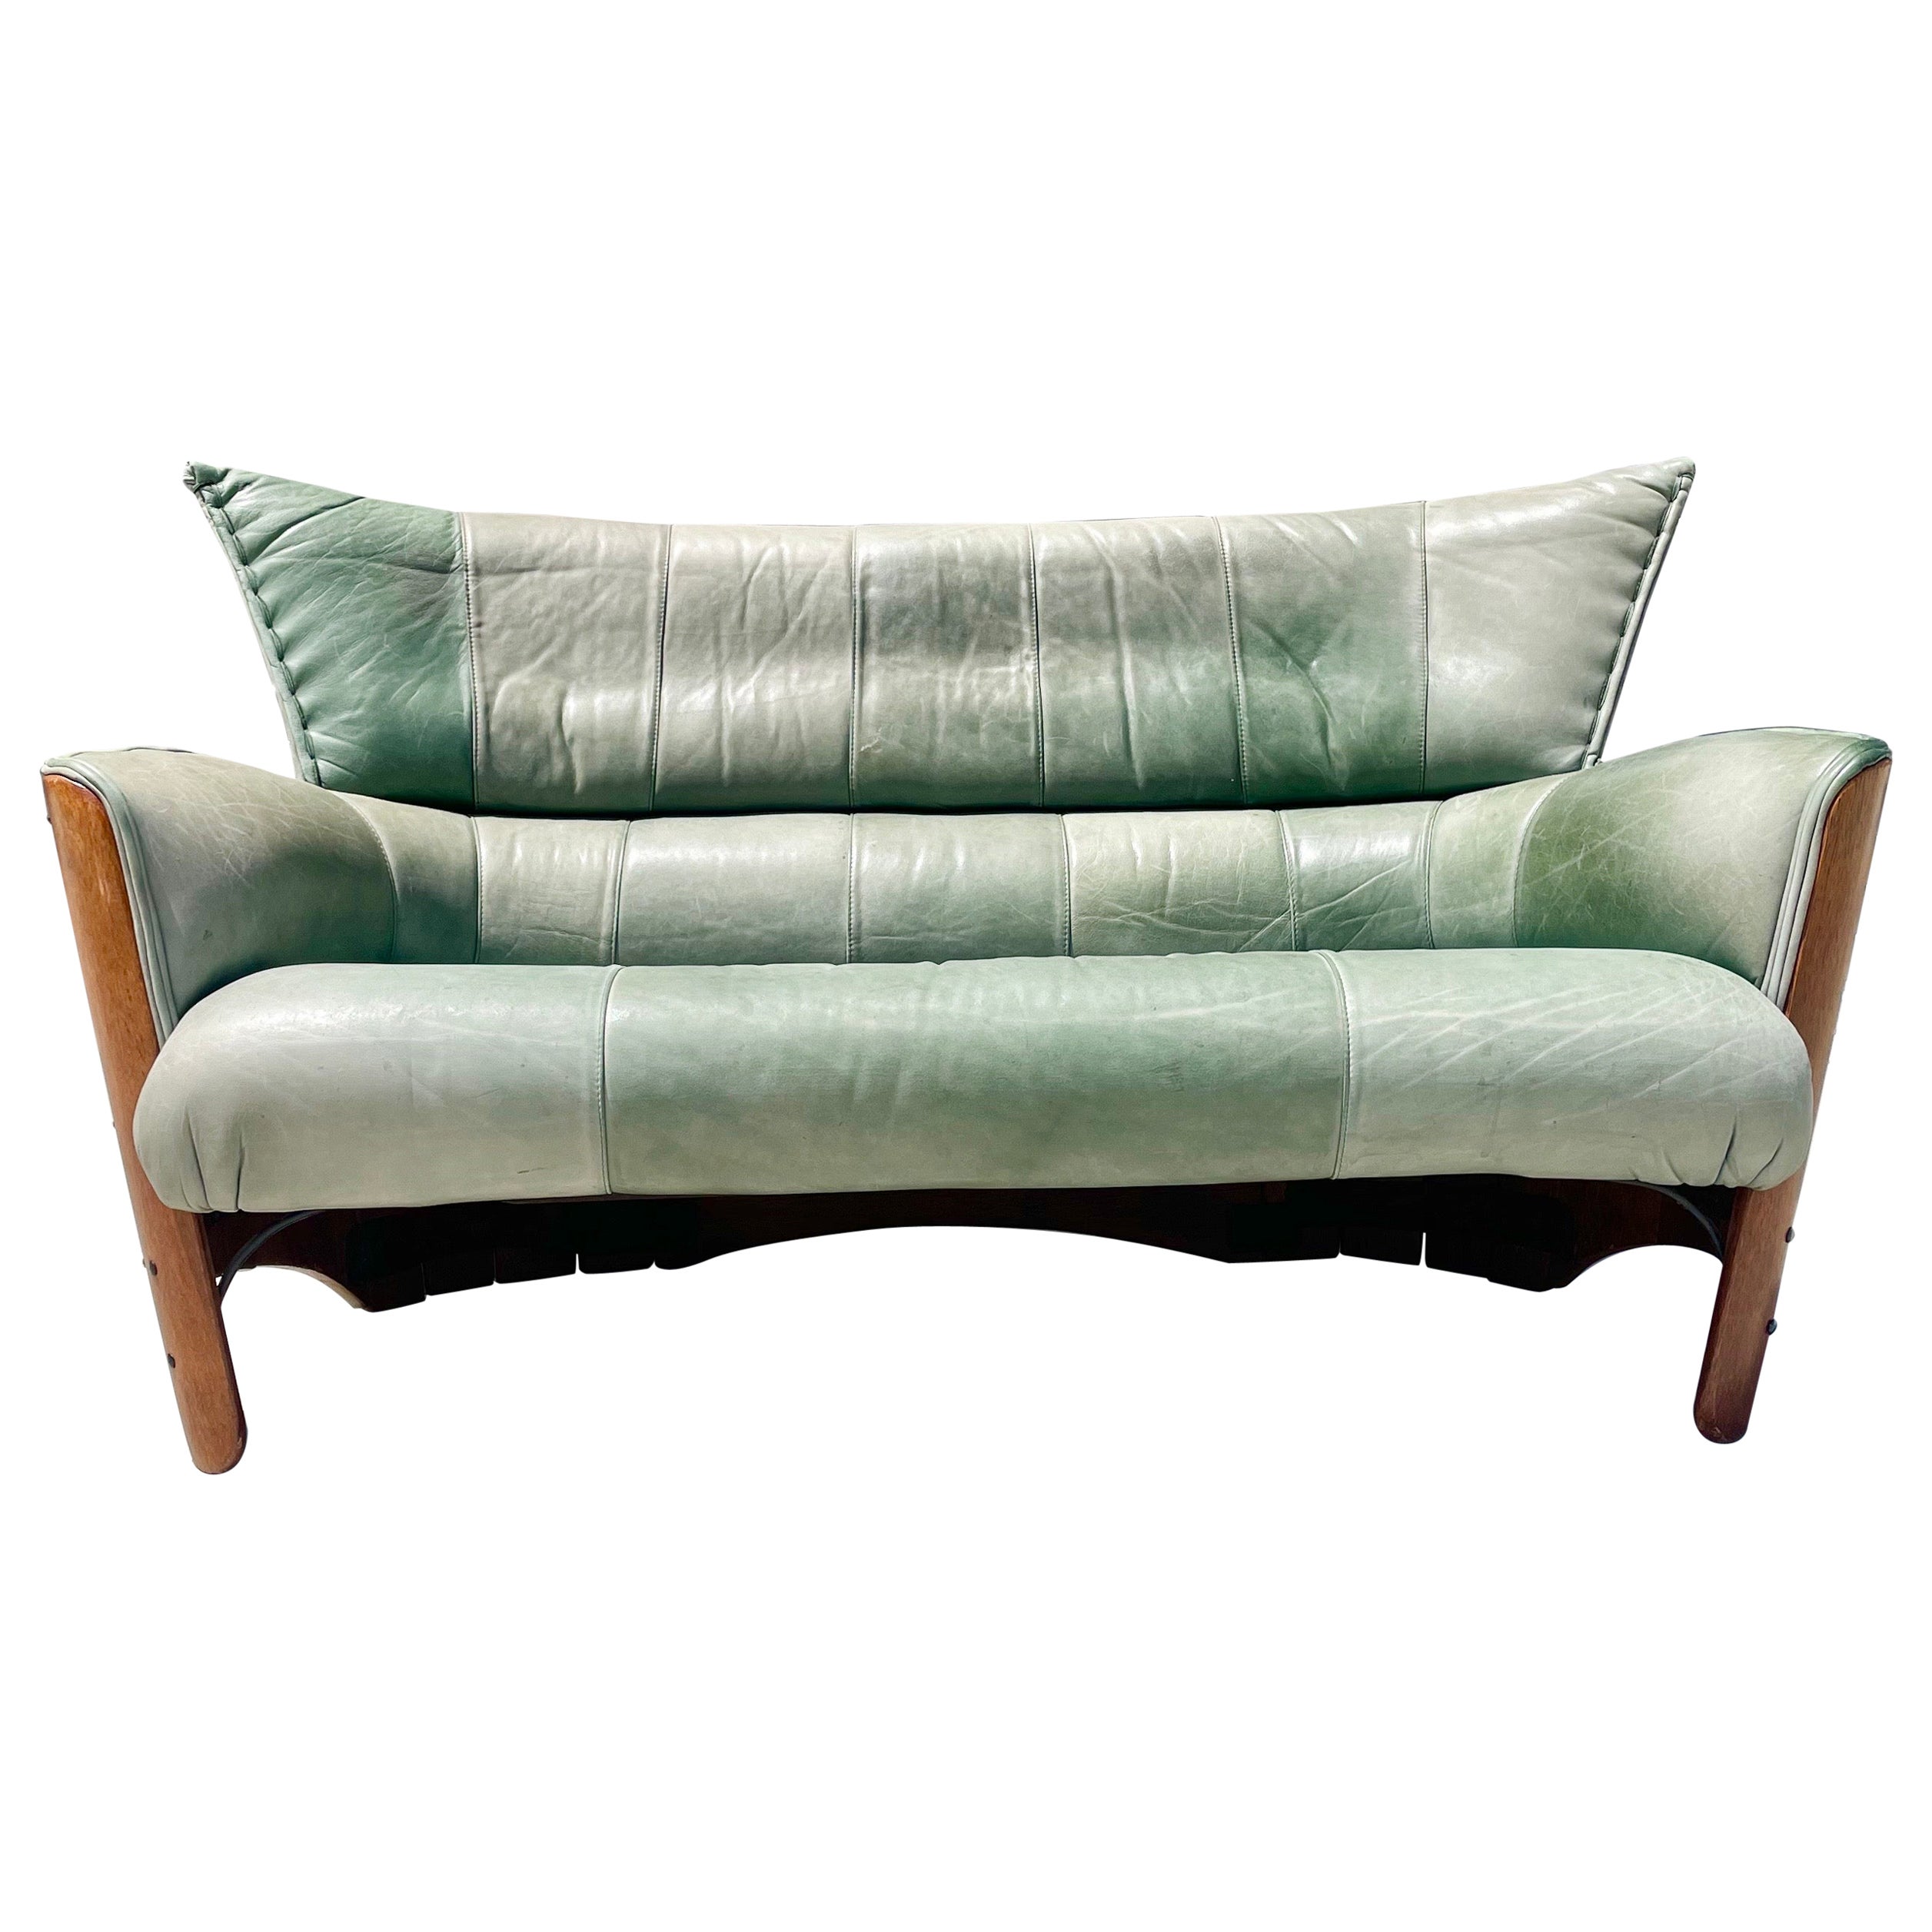 Midcentury Palmwood & Leather Sofa by Pacific Green